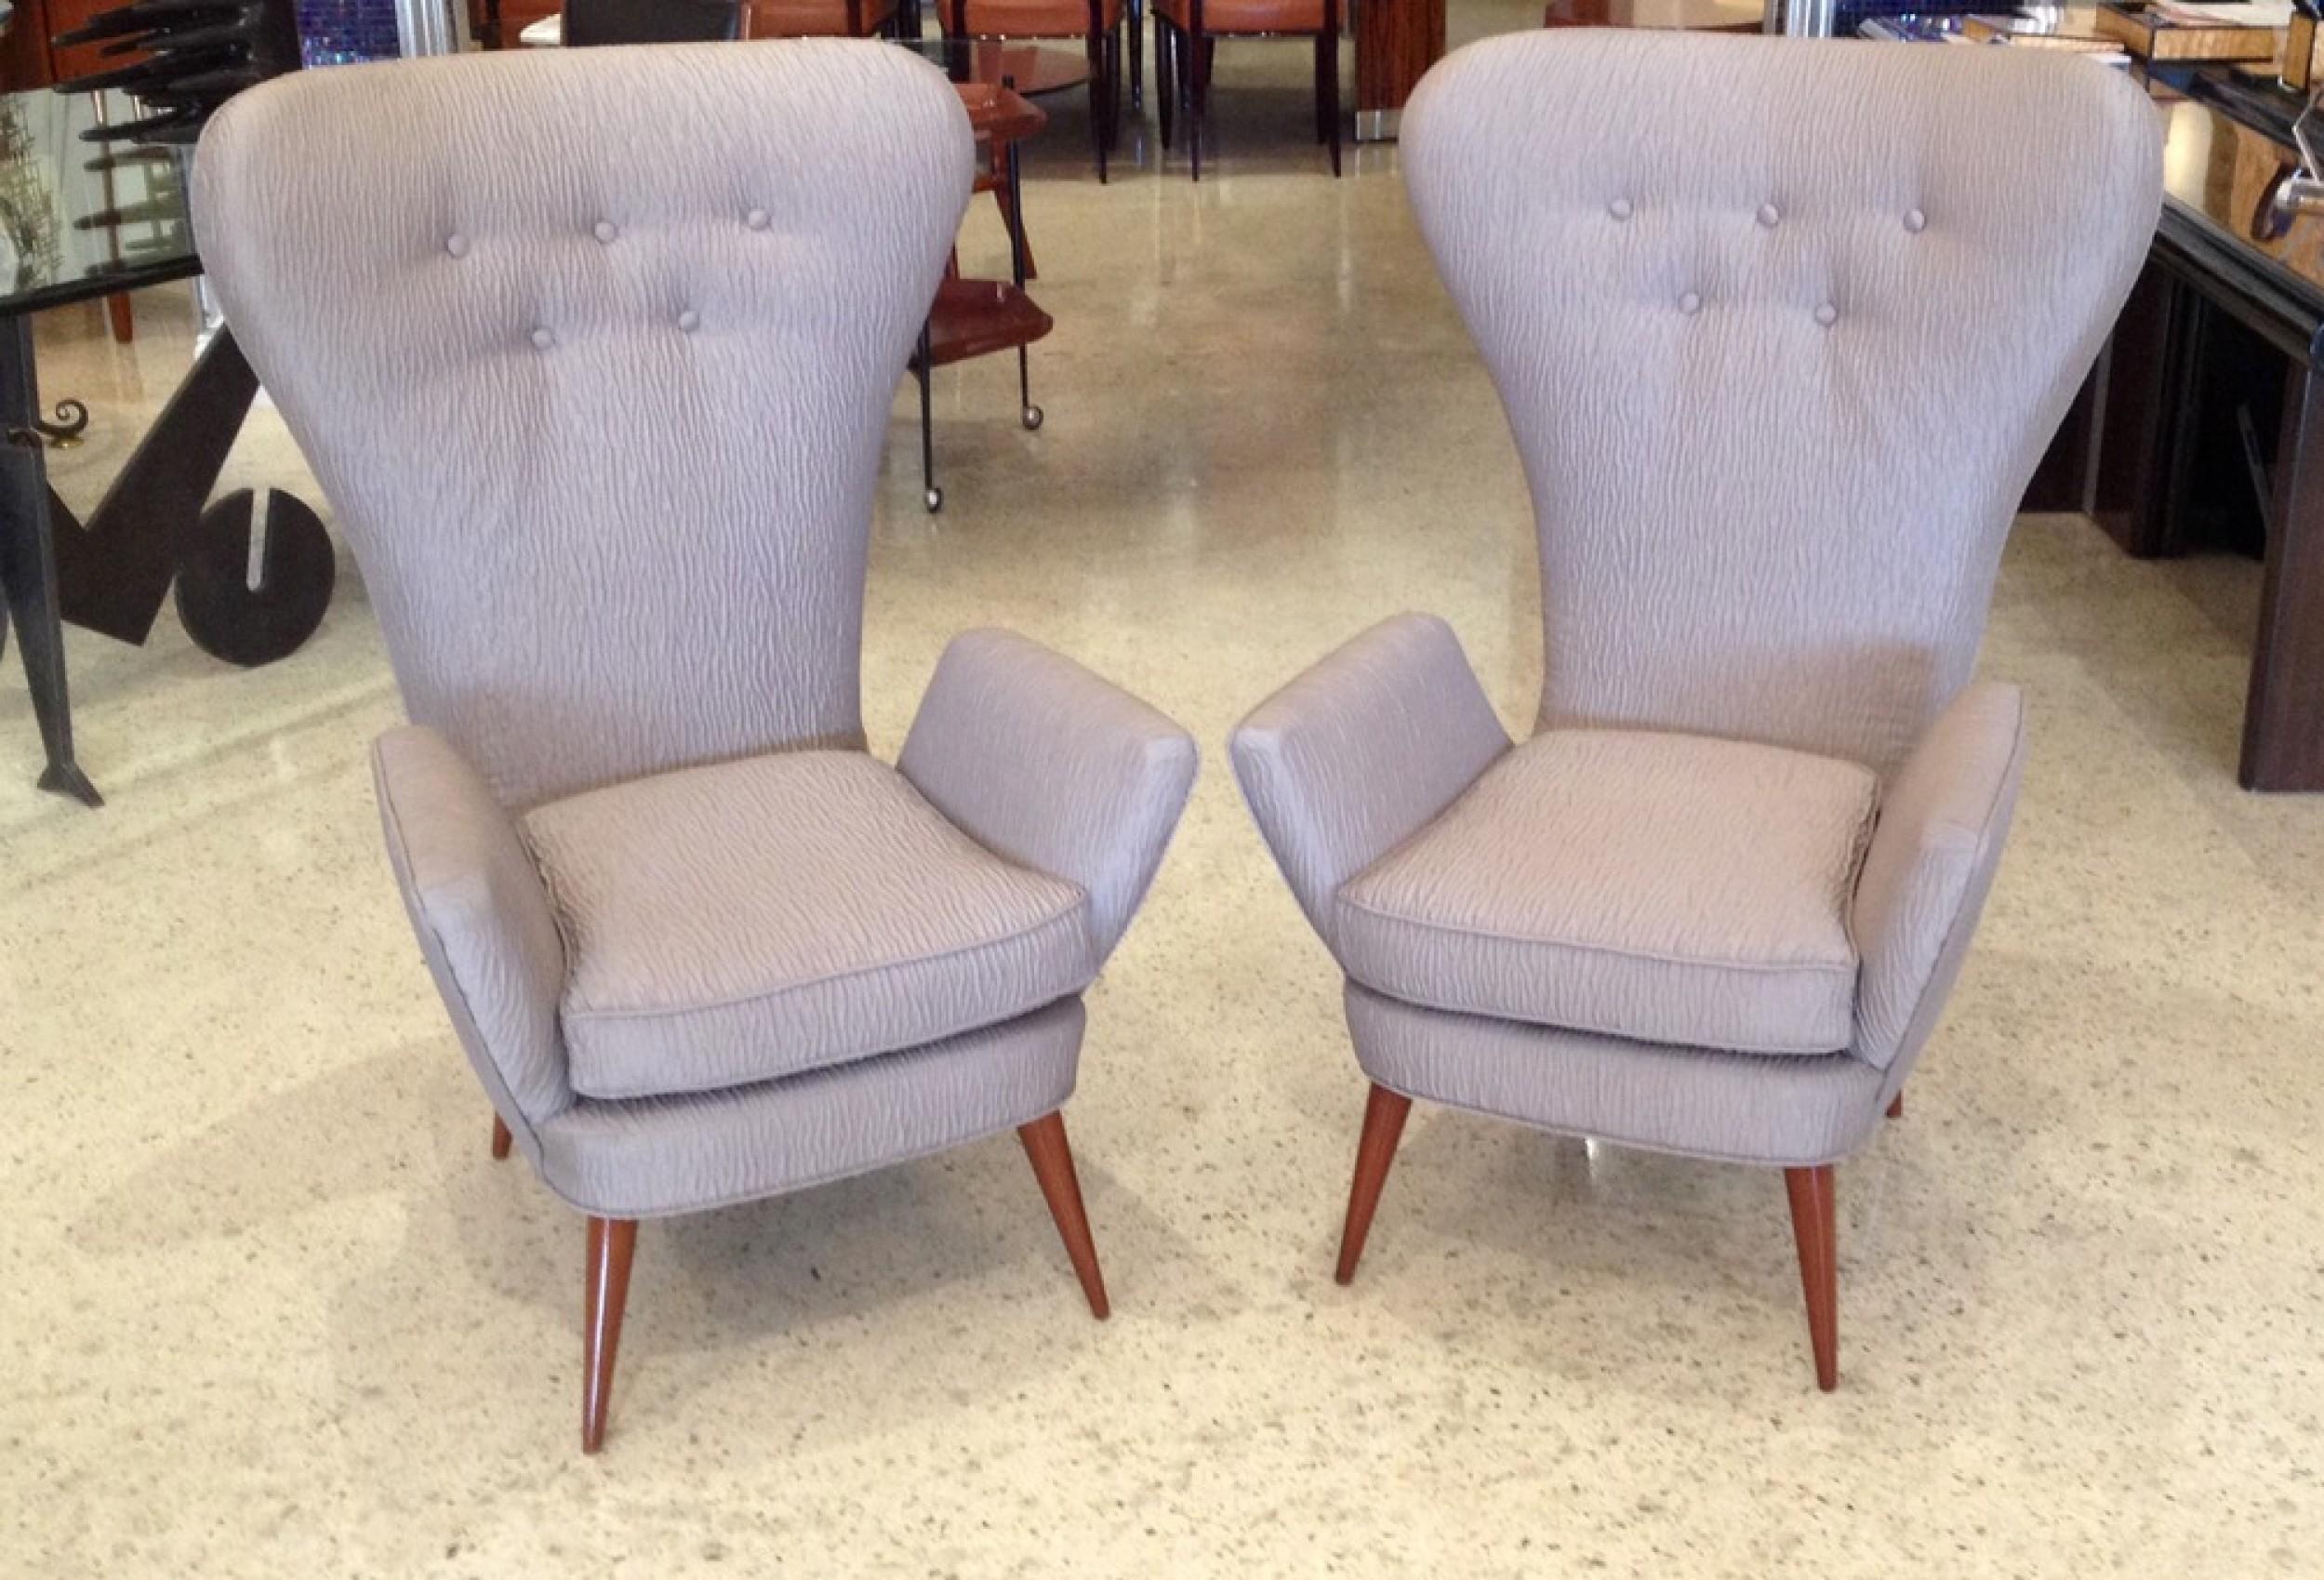 PAIR of Italian Modern armchairs with high fanned backs and angled armrests, upholstered in a gray textured fabric with button tufted detail and resting on four tapered walnut legs. (PRICED AS PAIR).